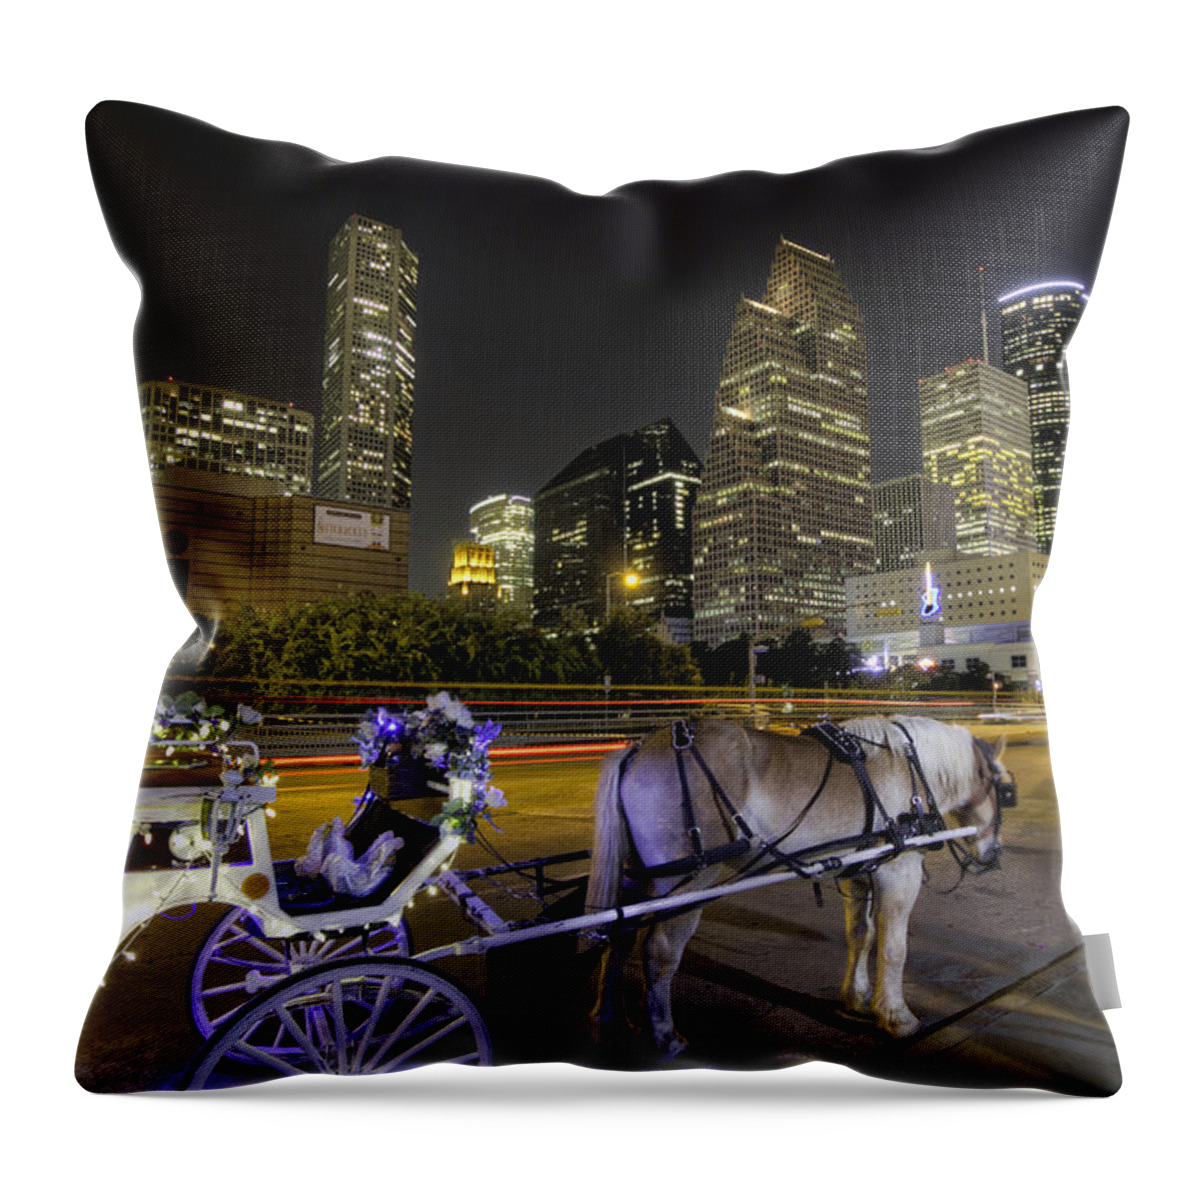 Aquarium Throw Pillow featuring the photograph Your Carriage Awaits by Tim Stanley